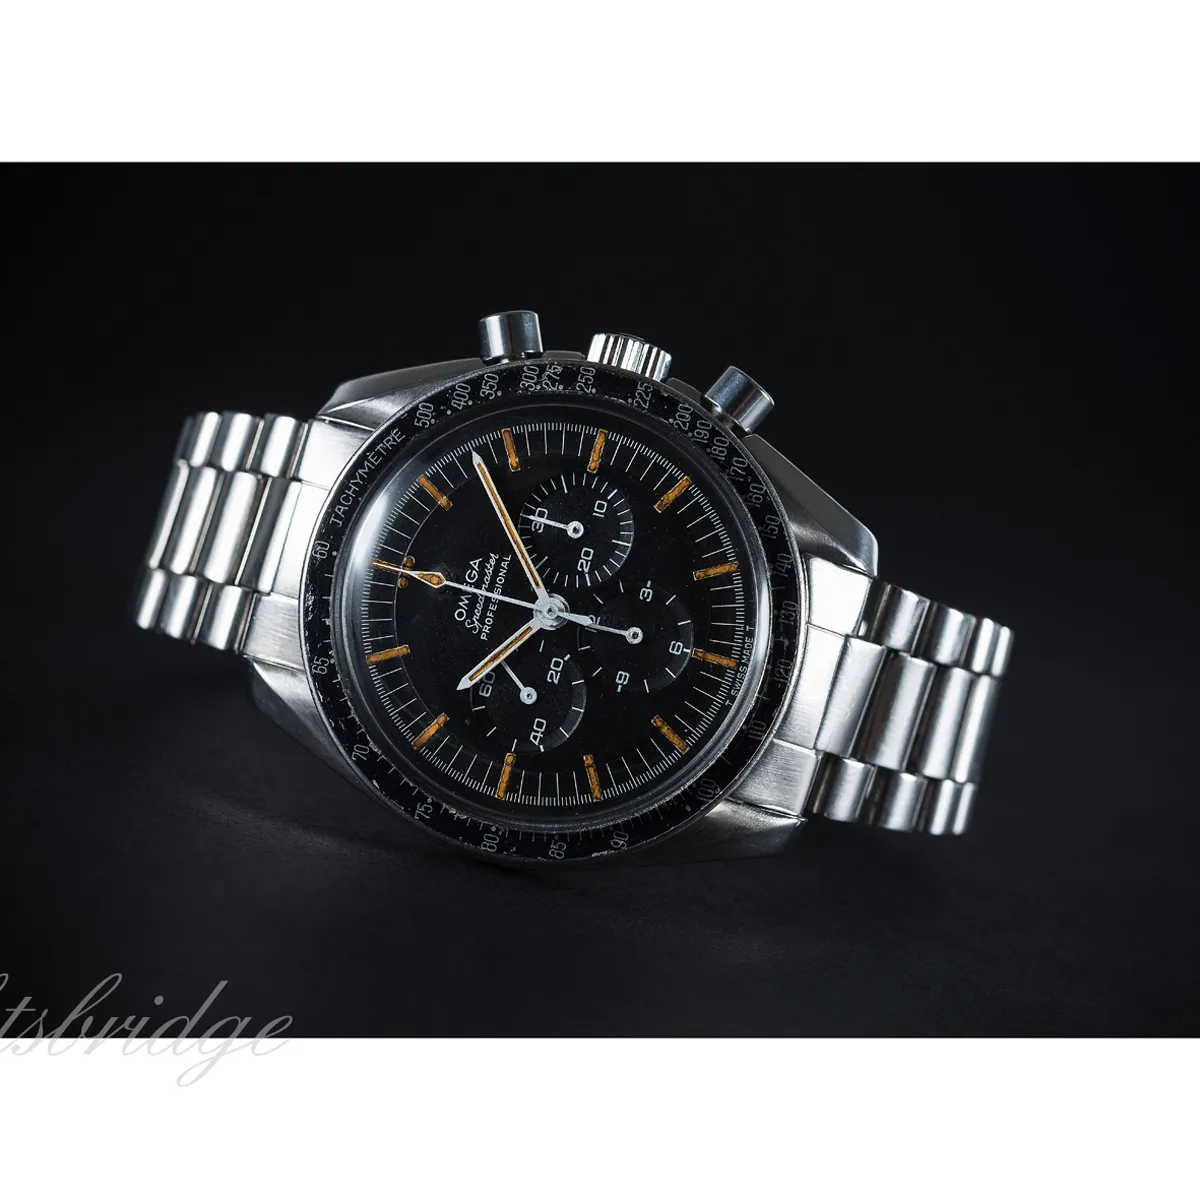 Omega Speedmaster Professional Moonwatch Moonphase 145.012-67 42mm Stainless steel Black 1